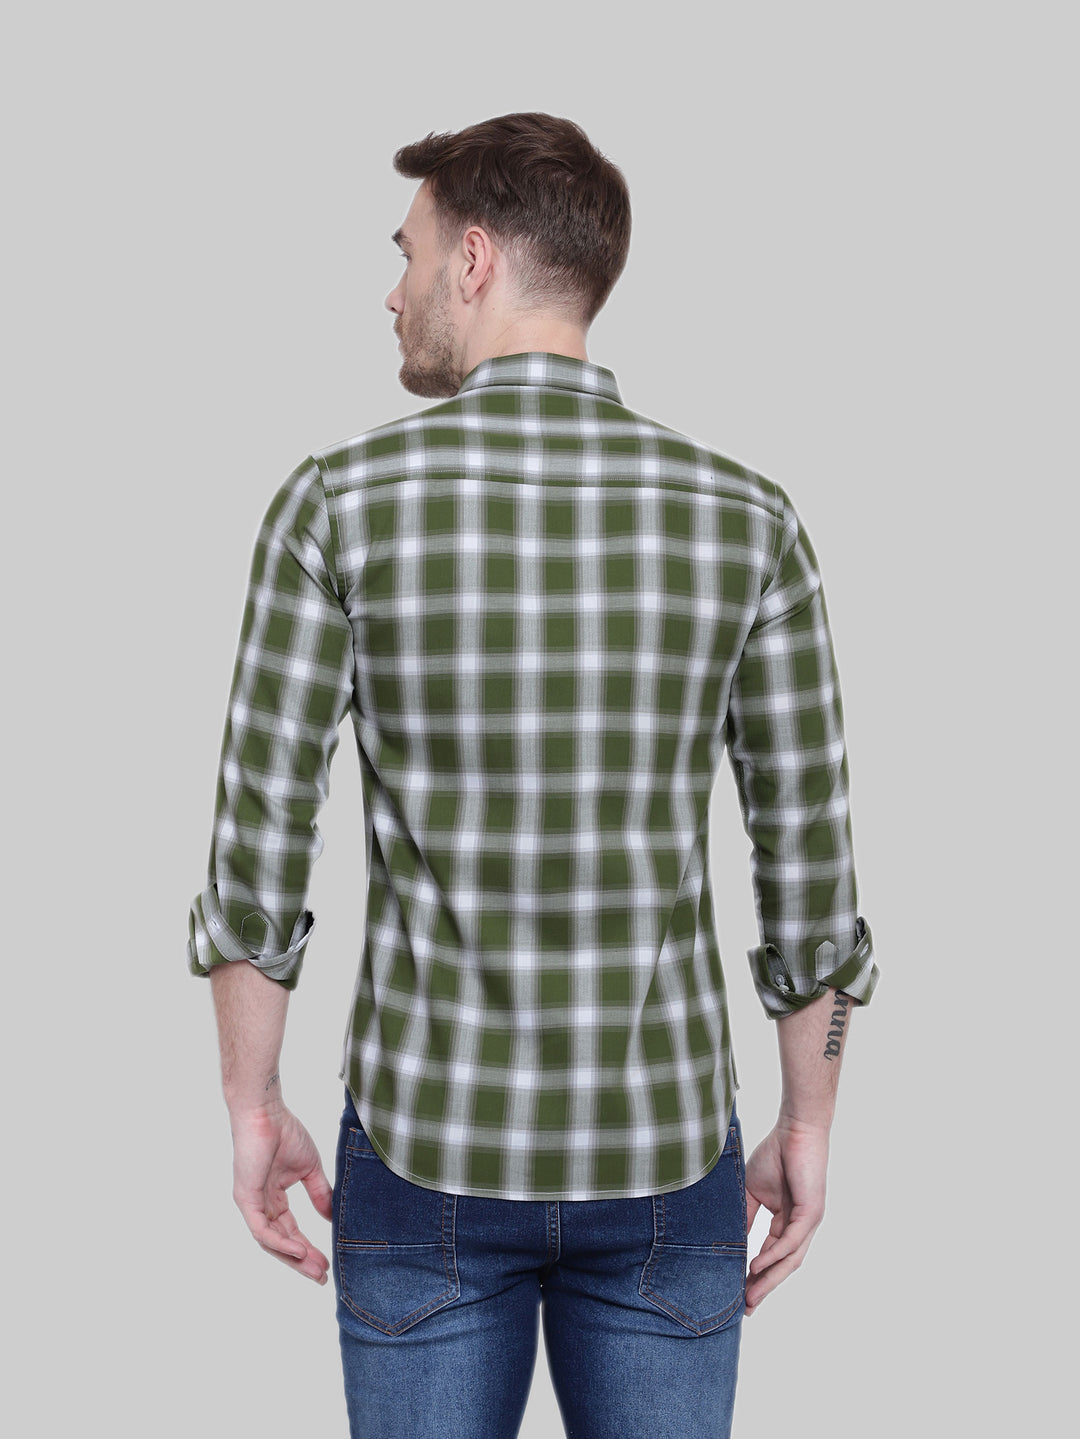 Olive Gingham Checkered Full Sleeve Cotton Shirt